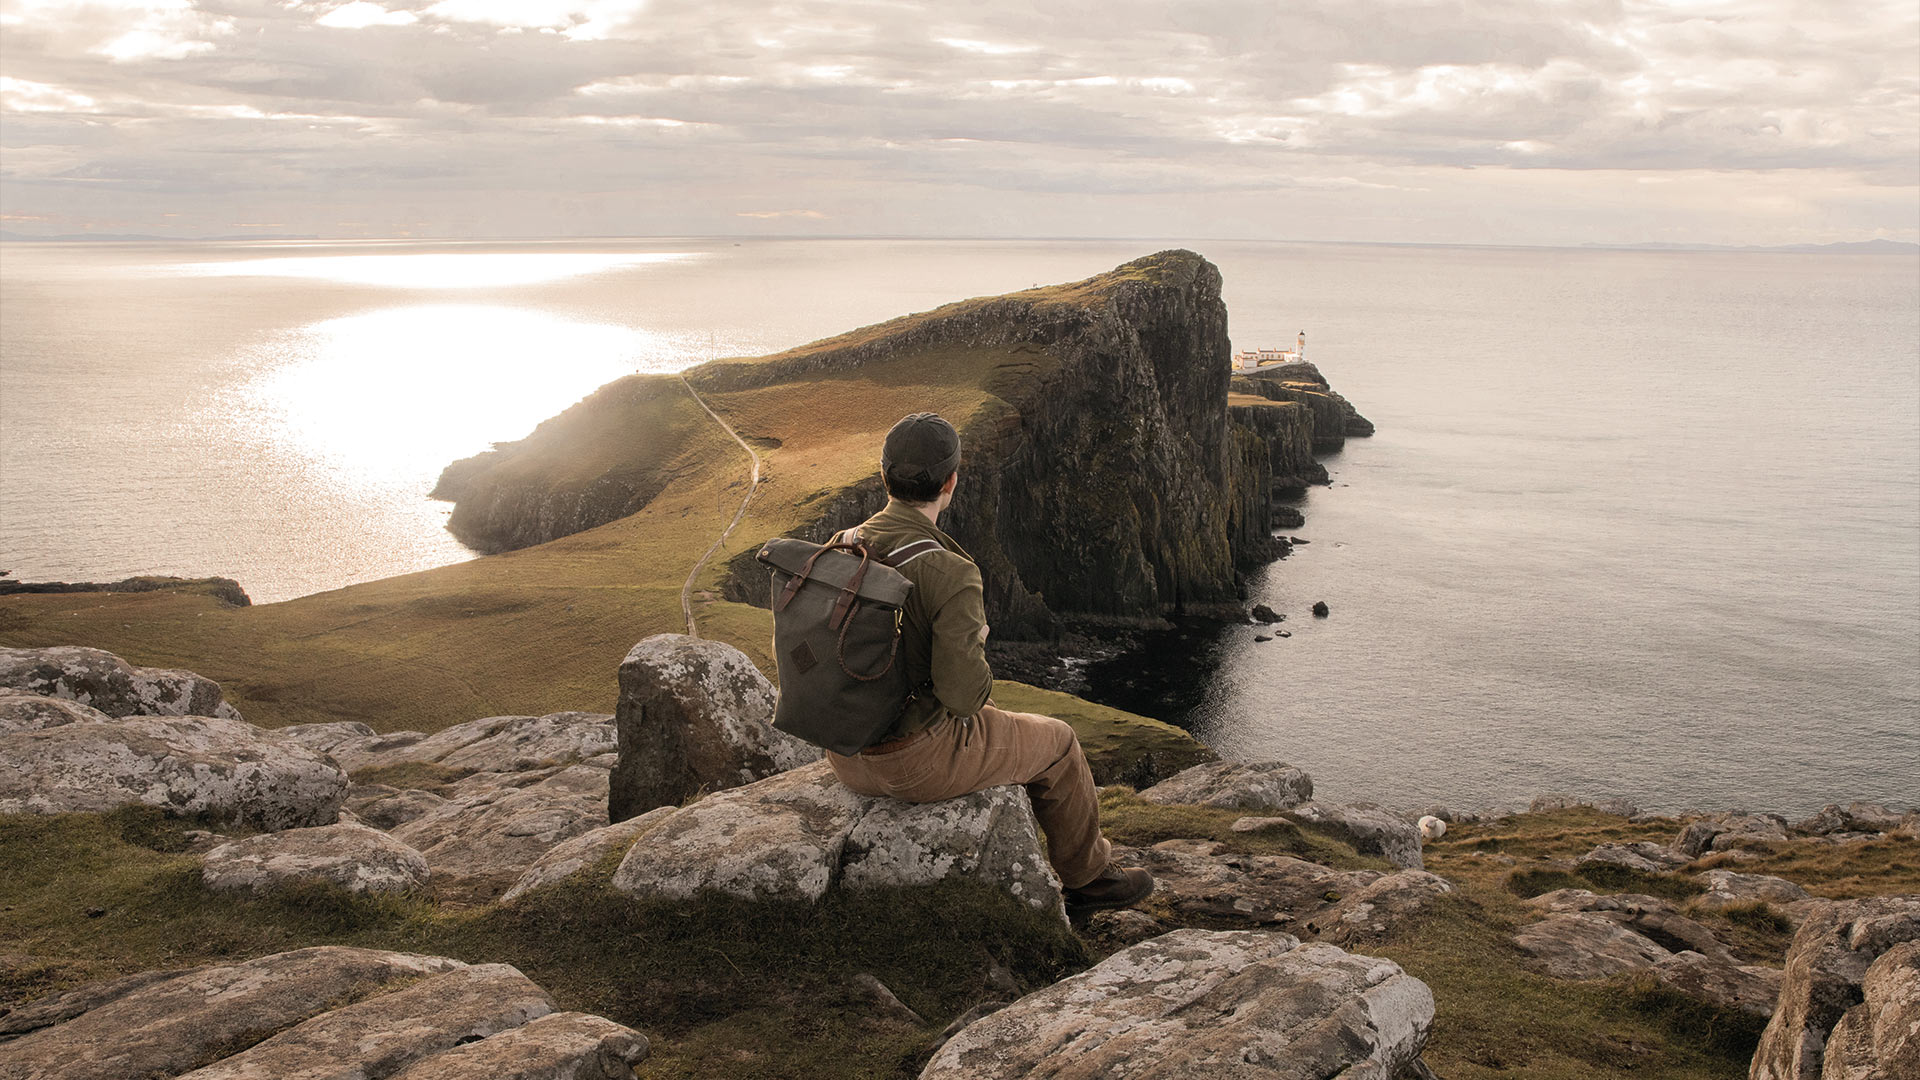 A man at the top of a cliff looks towards the horizon and carries the Woody canvas bag on his back.